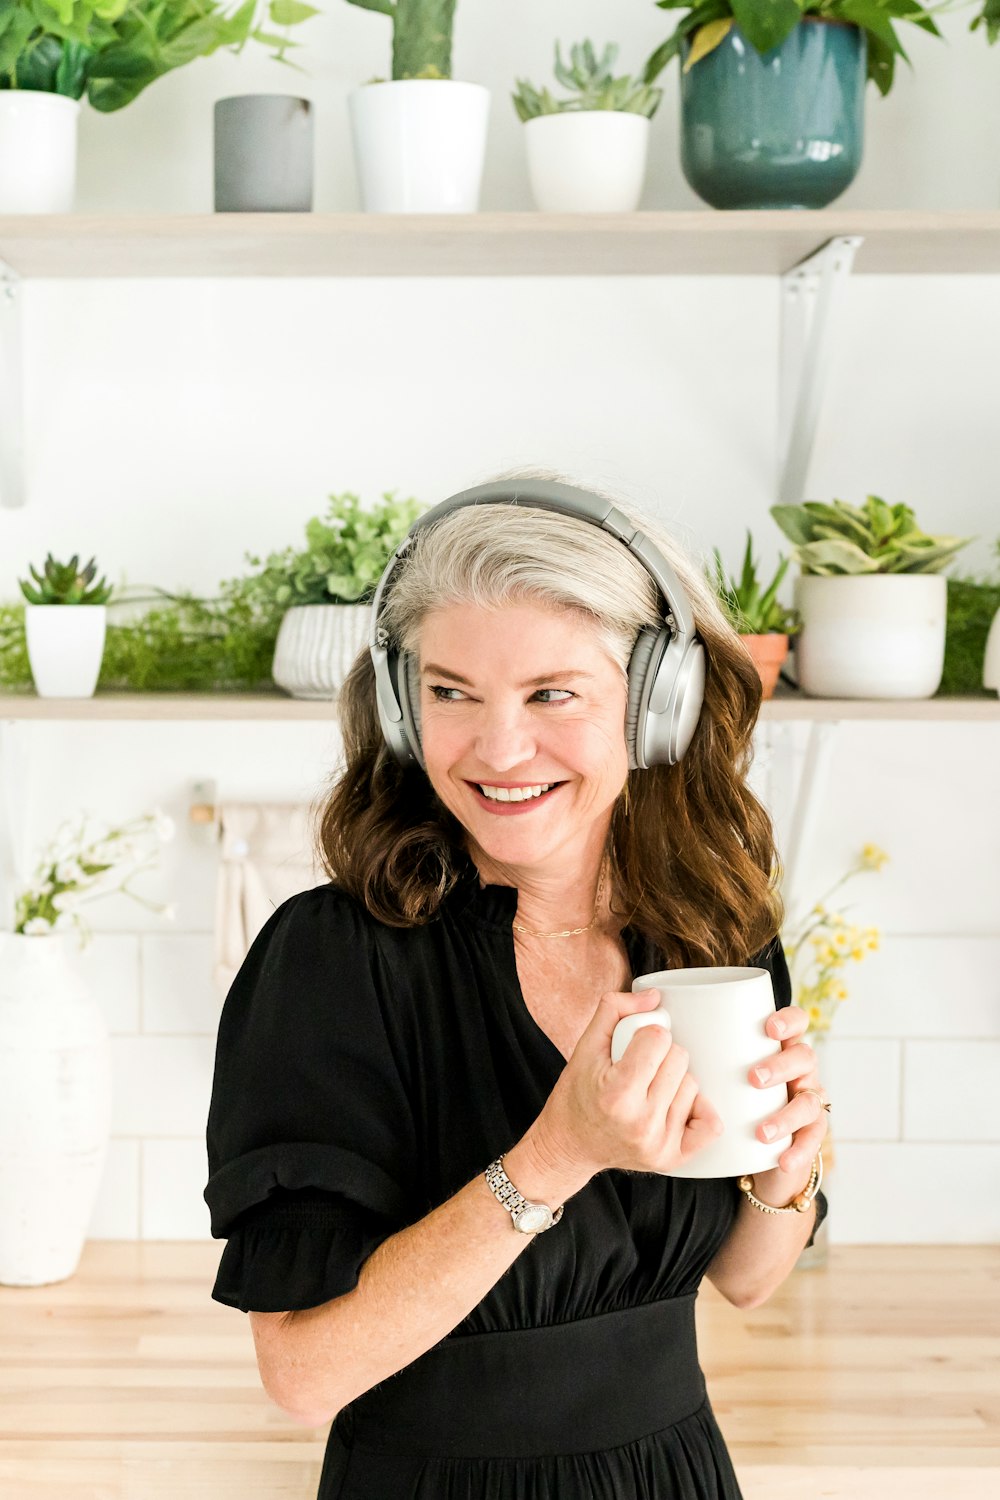 a woman wearing headphones and holding a cup